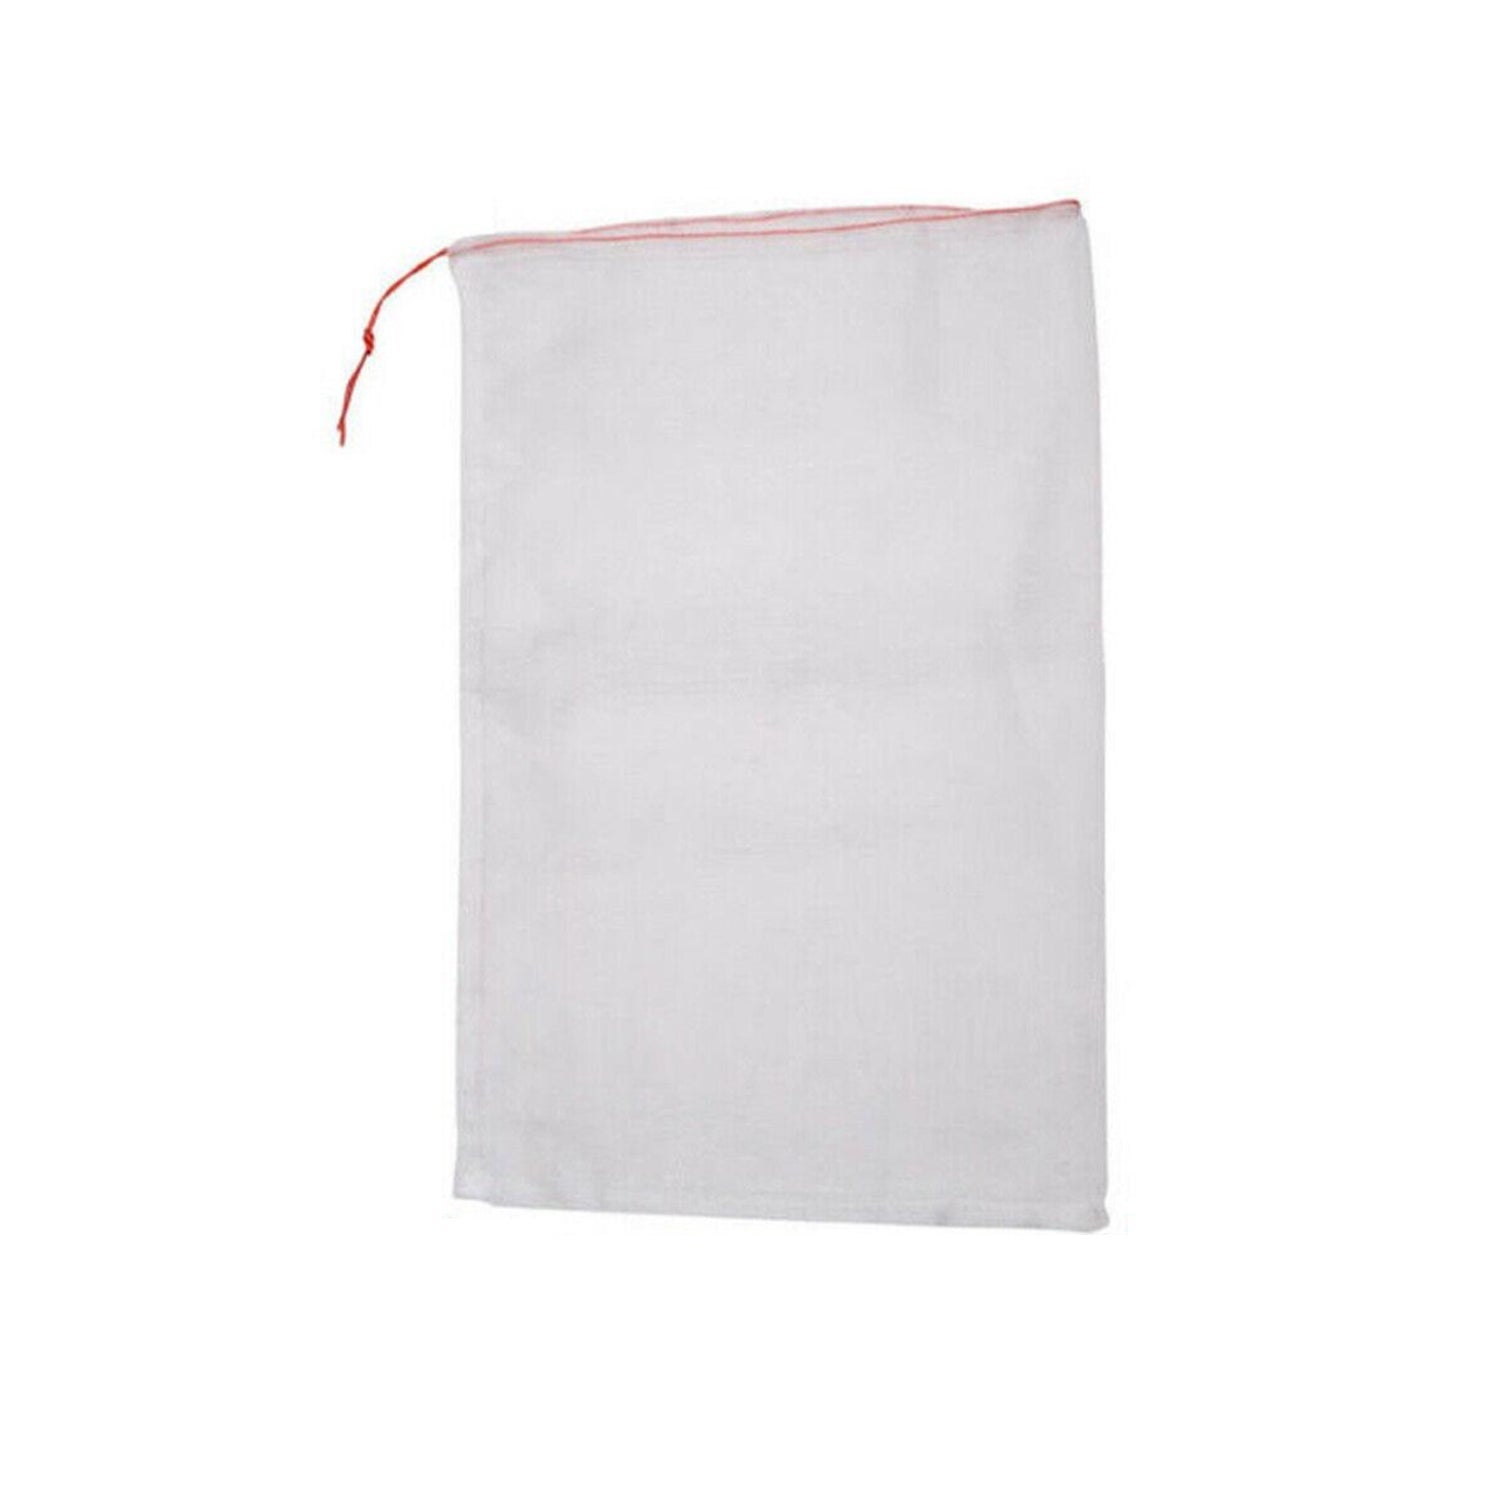 Outdoor Garden Insect Proof Fruit and Vegetable Agriculture Net Bags